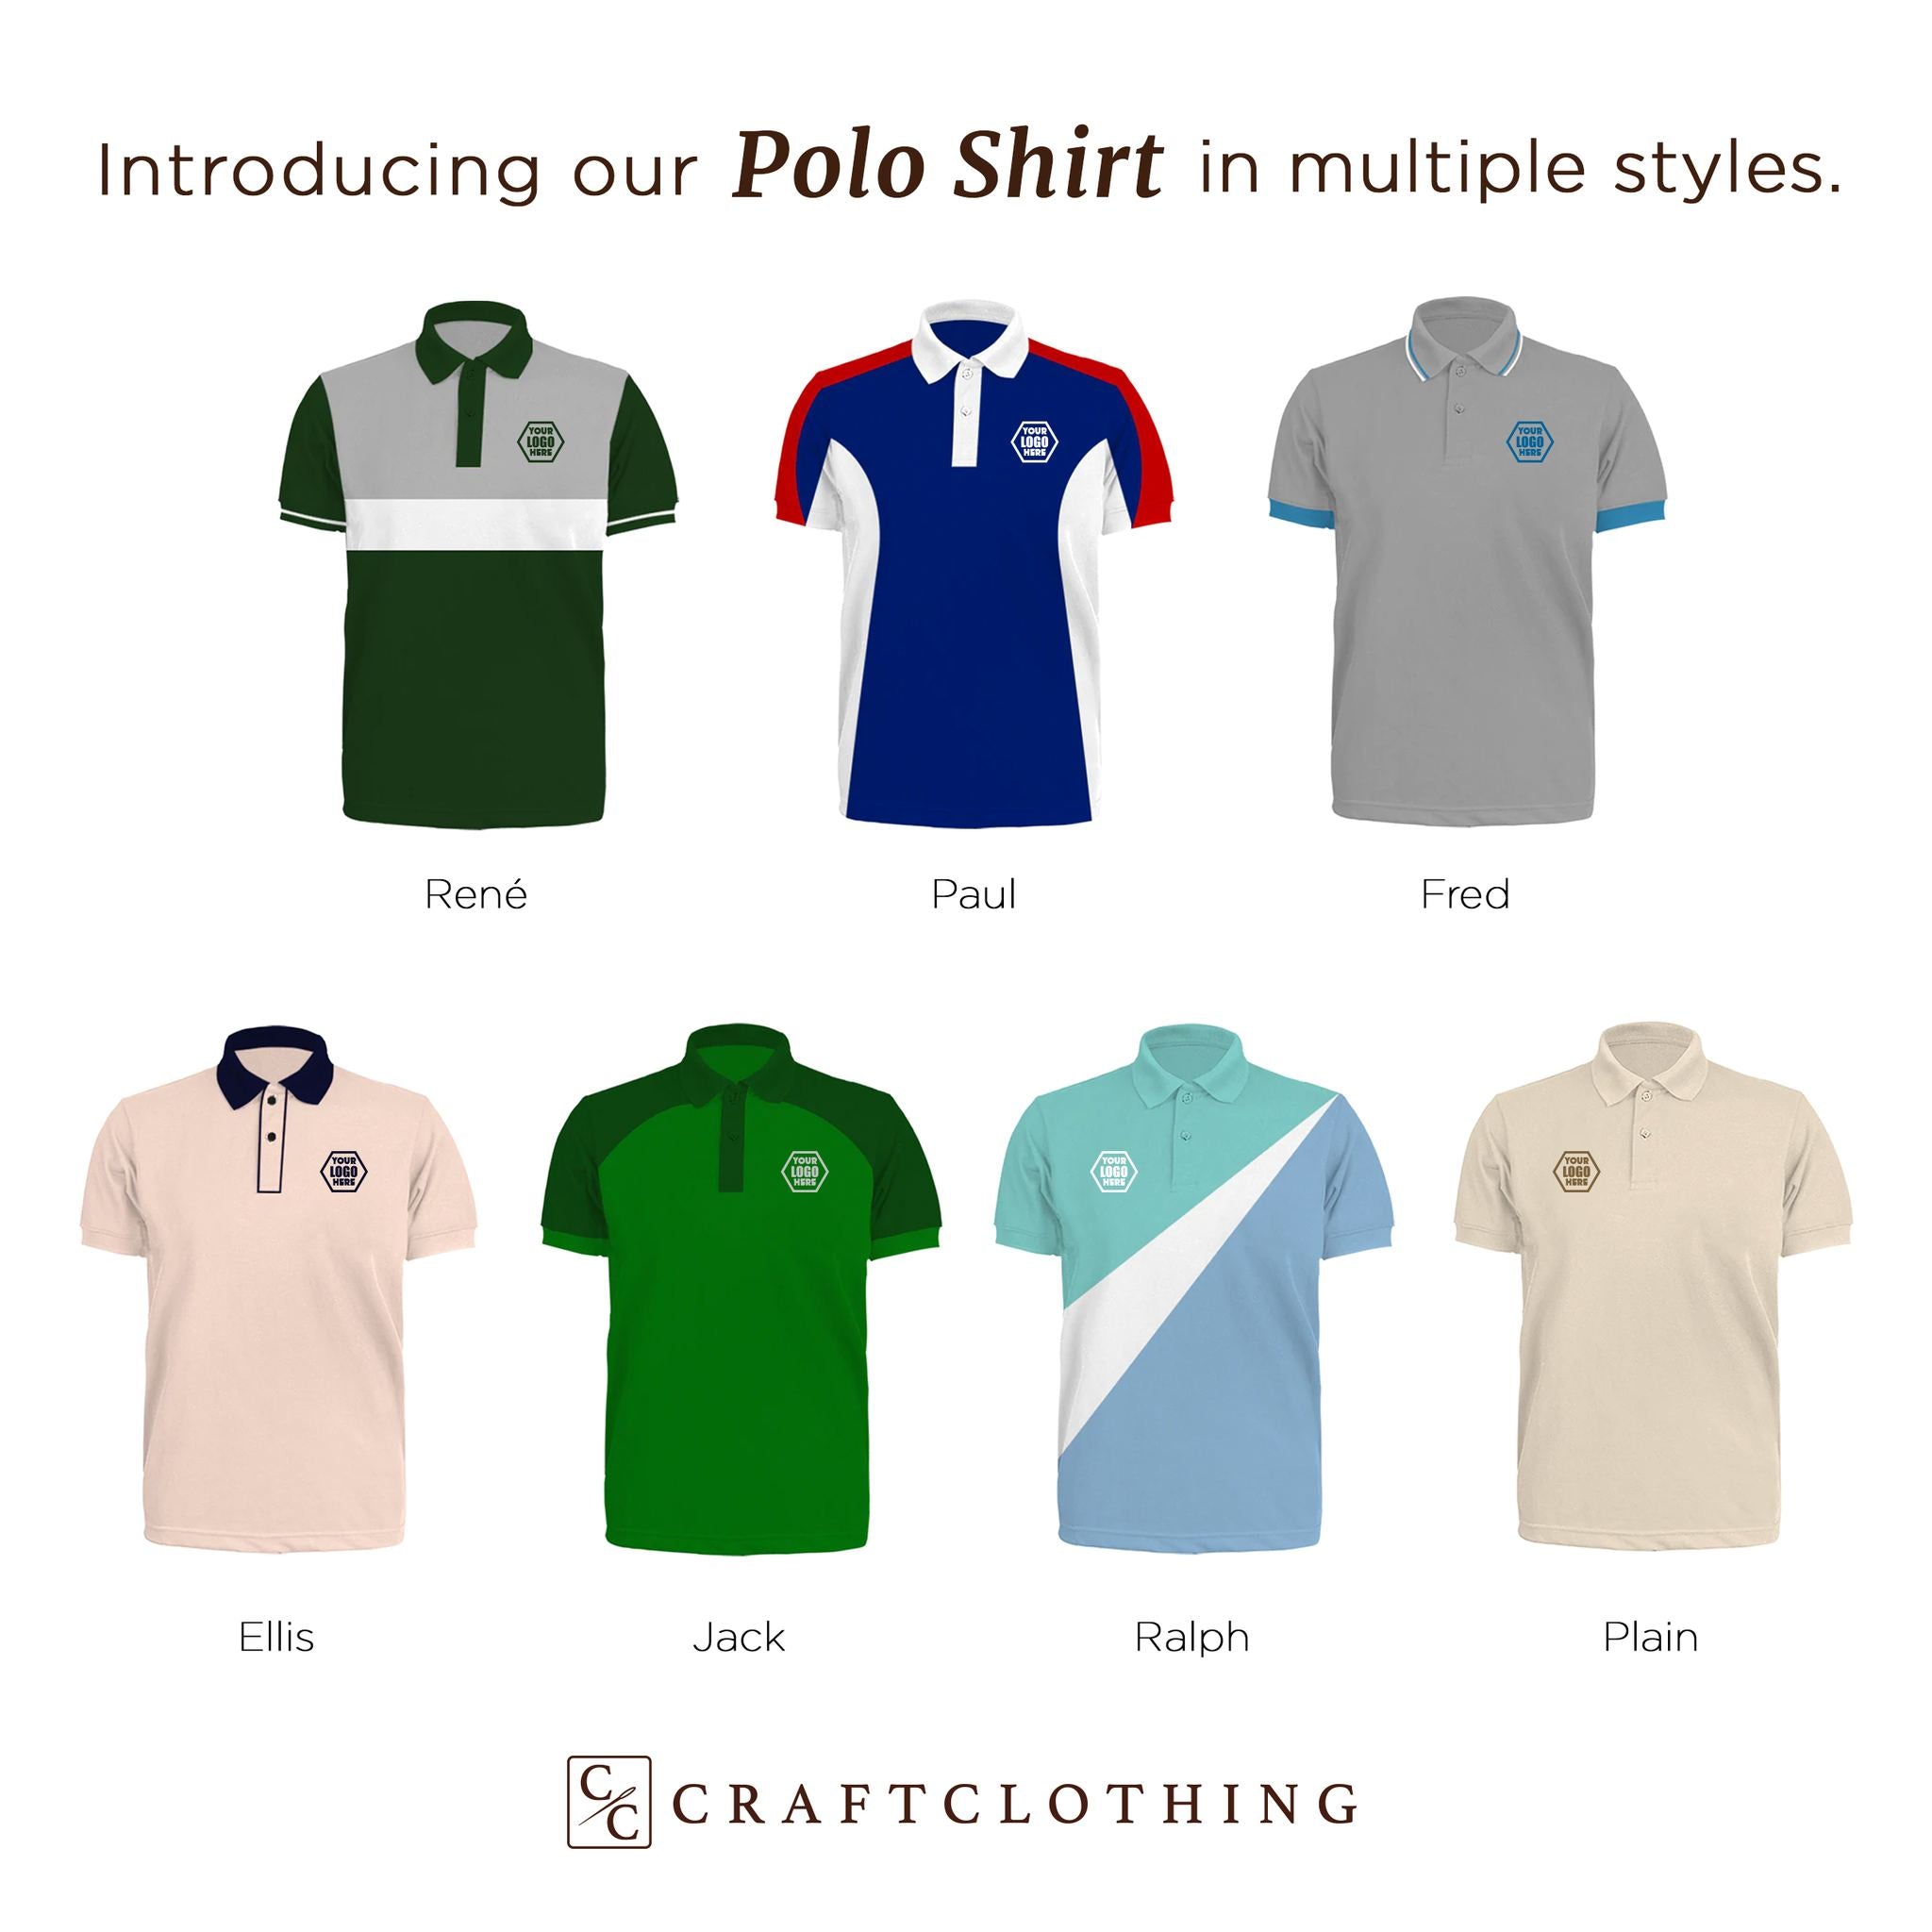 Looking for custom Polo Shirts for your team?